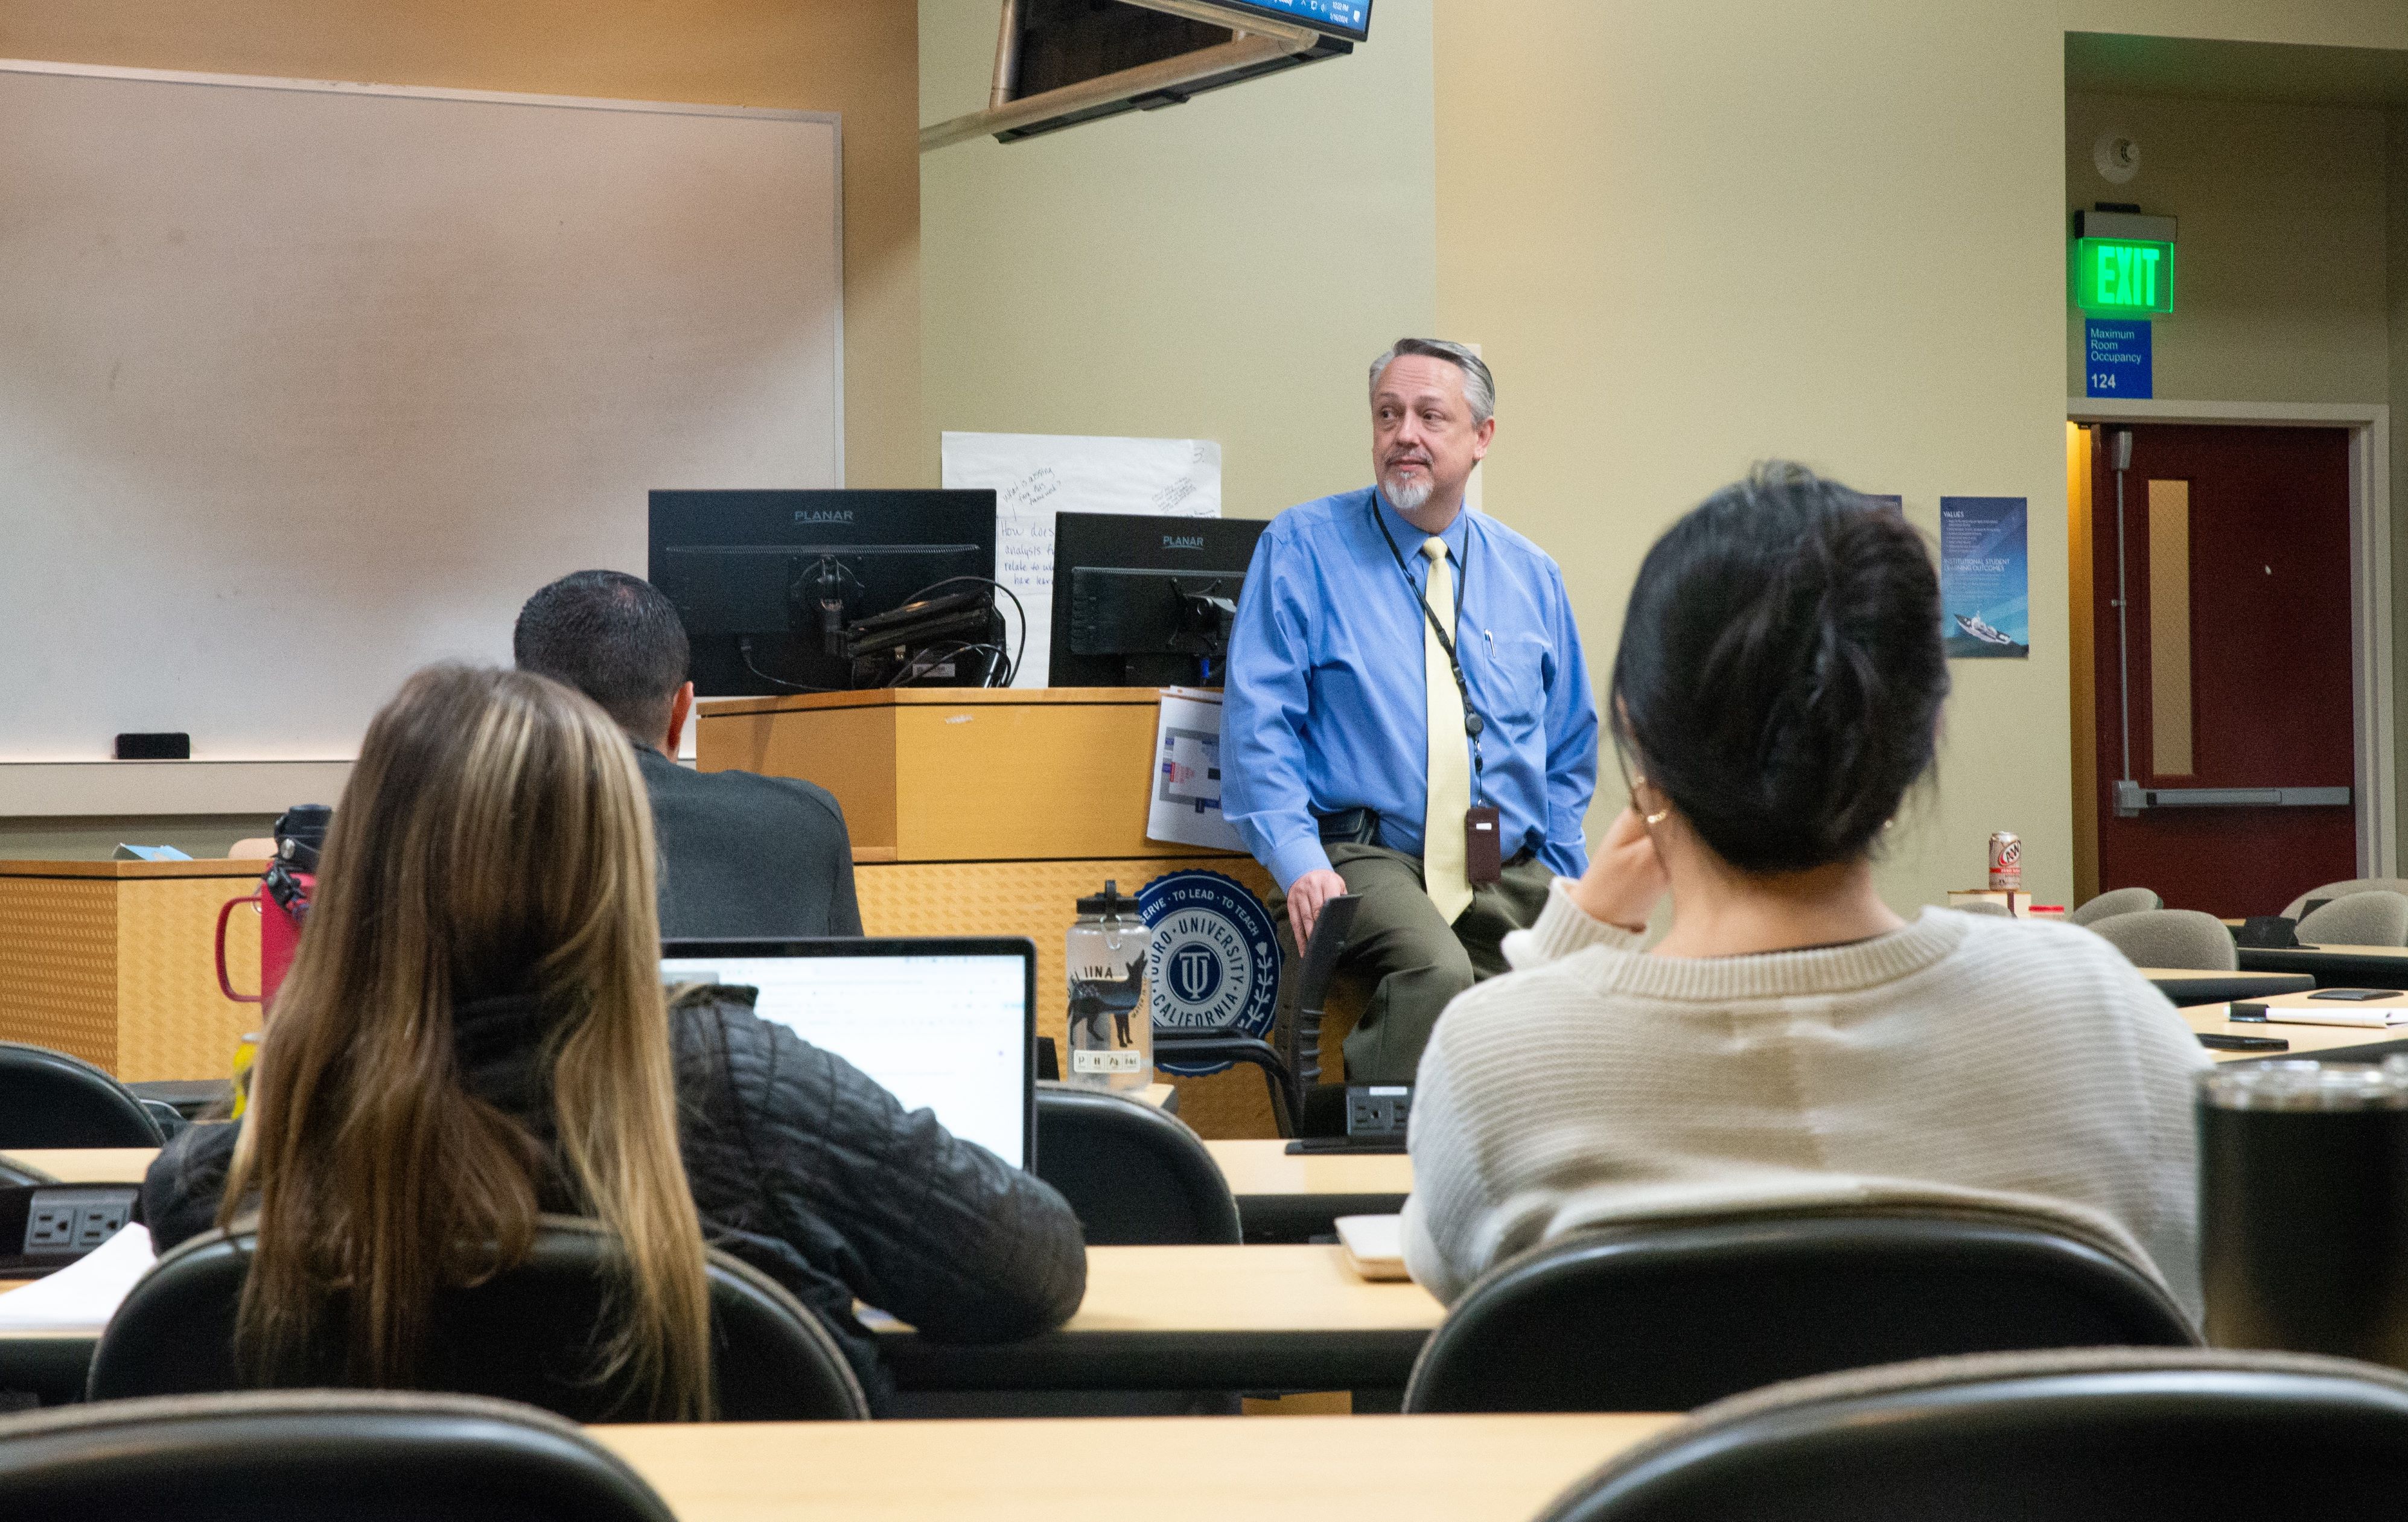 Dr. Jim Scott, Dean of the College of Pharmacy stands in front of a classroom full of students